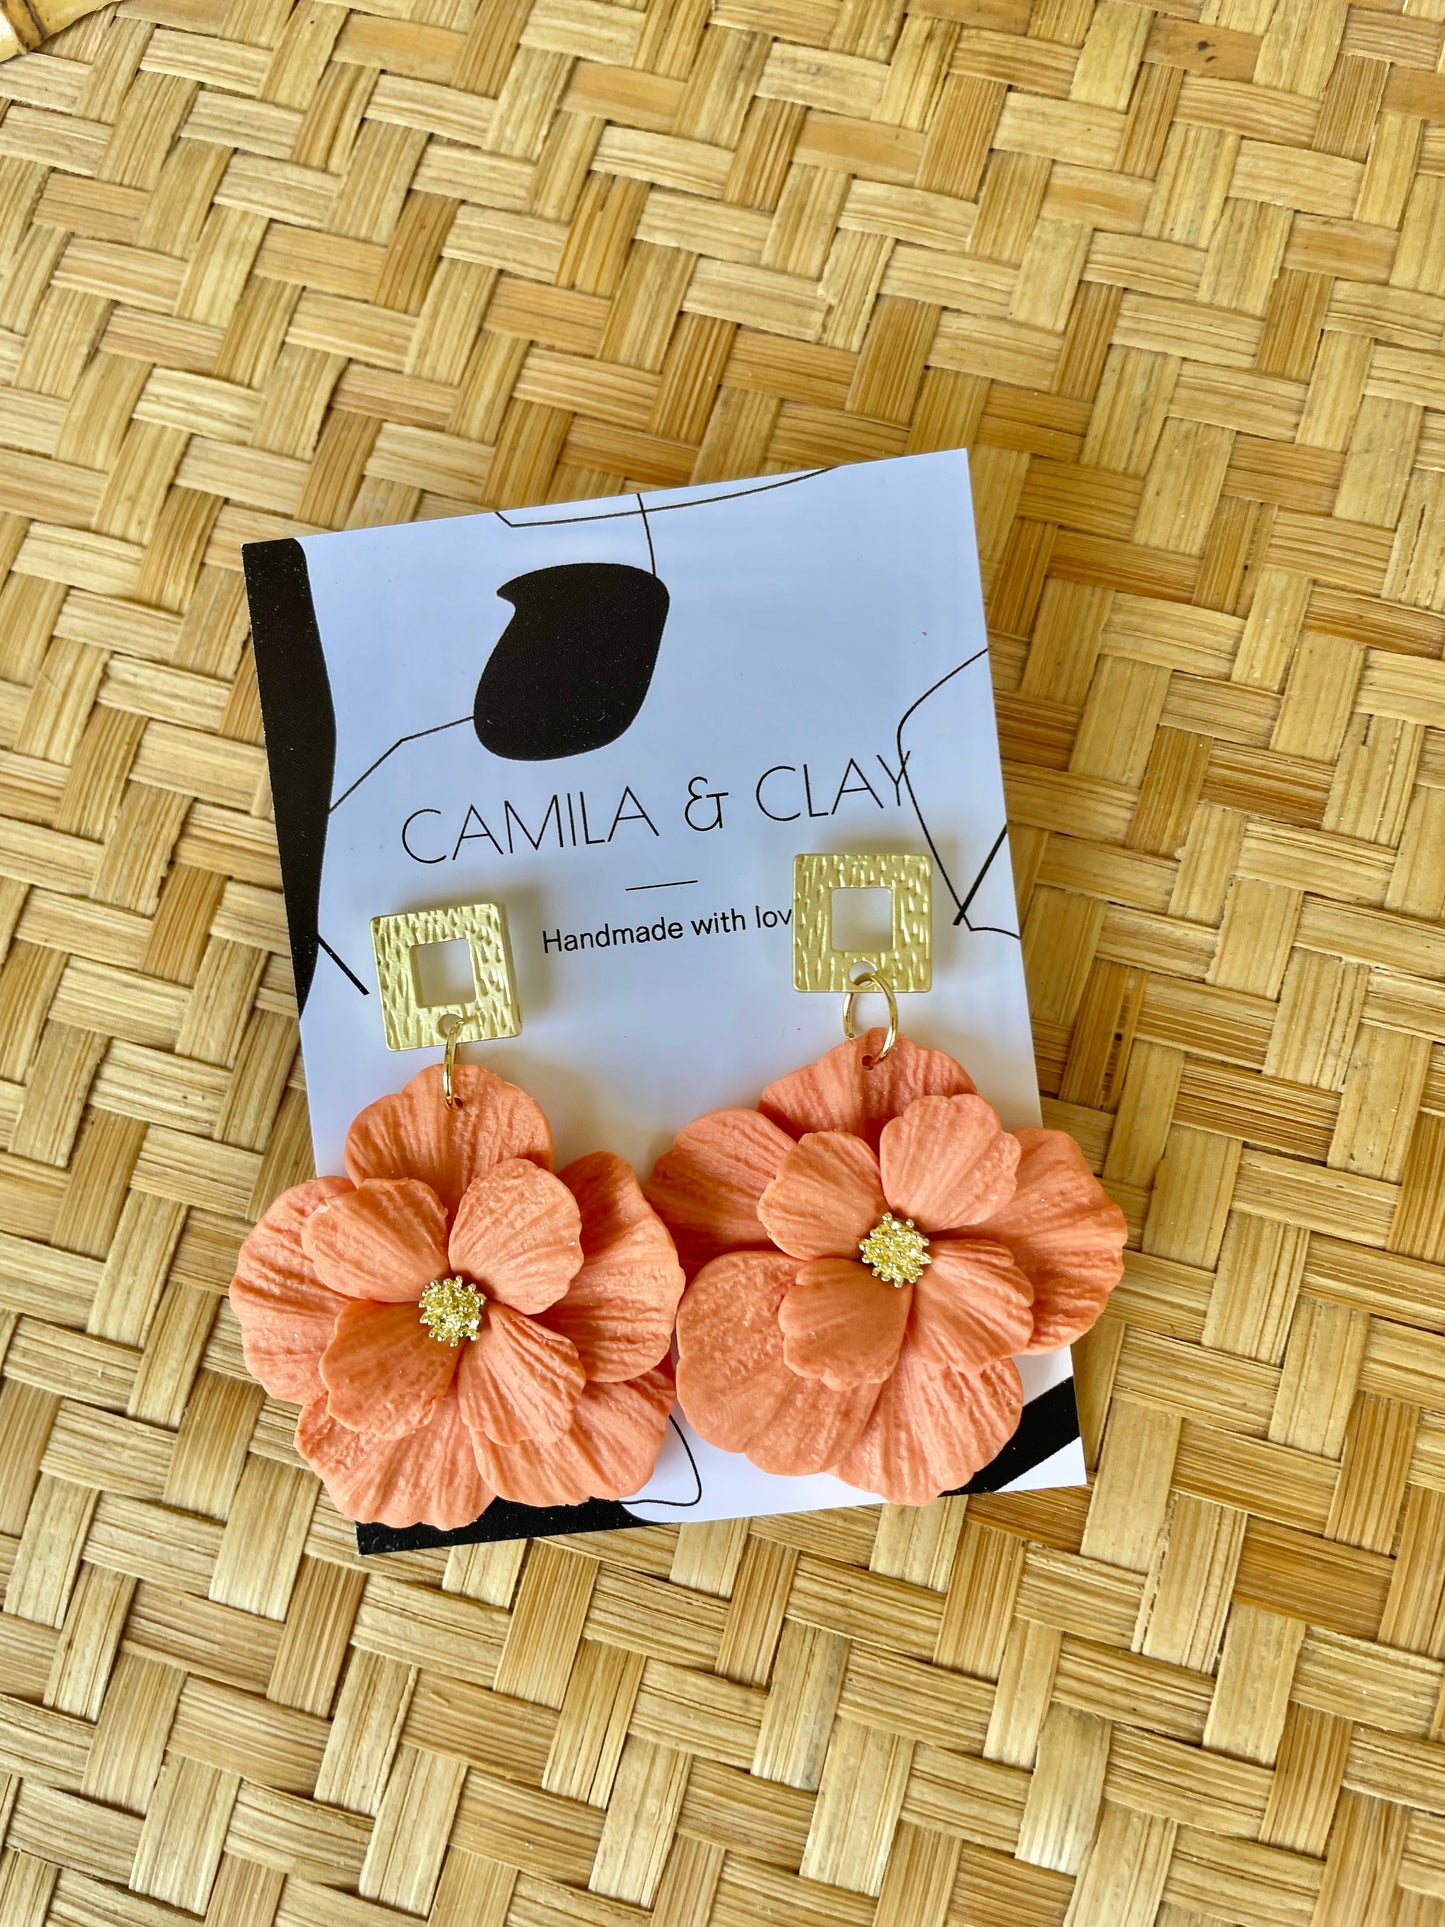 Handcrafted Floral Blooms Earrings